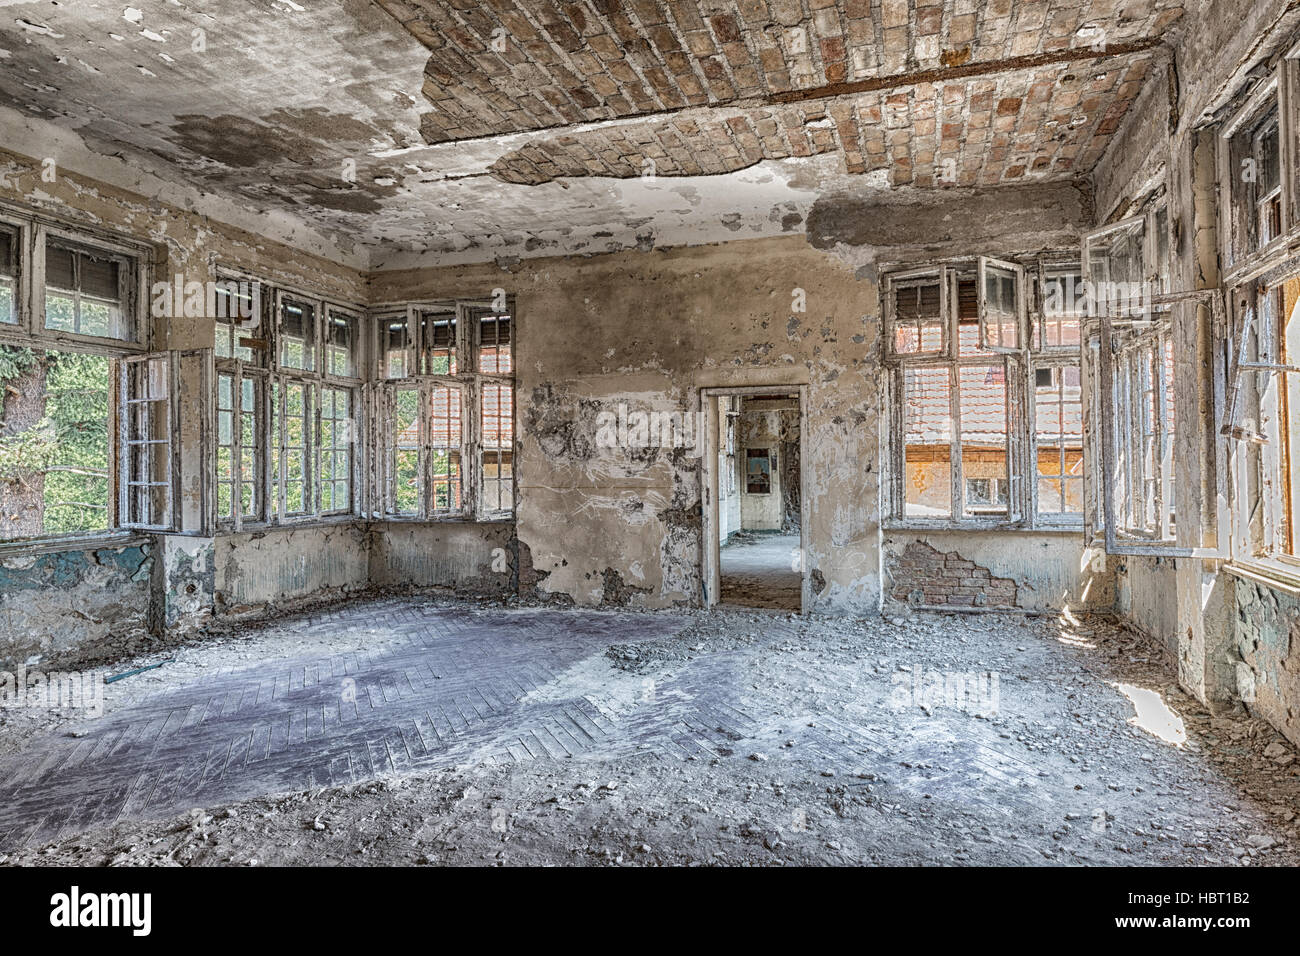 Grabowsee - a very impressive lost place nearby Berlin. Stock Photo